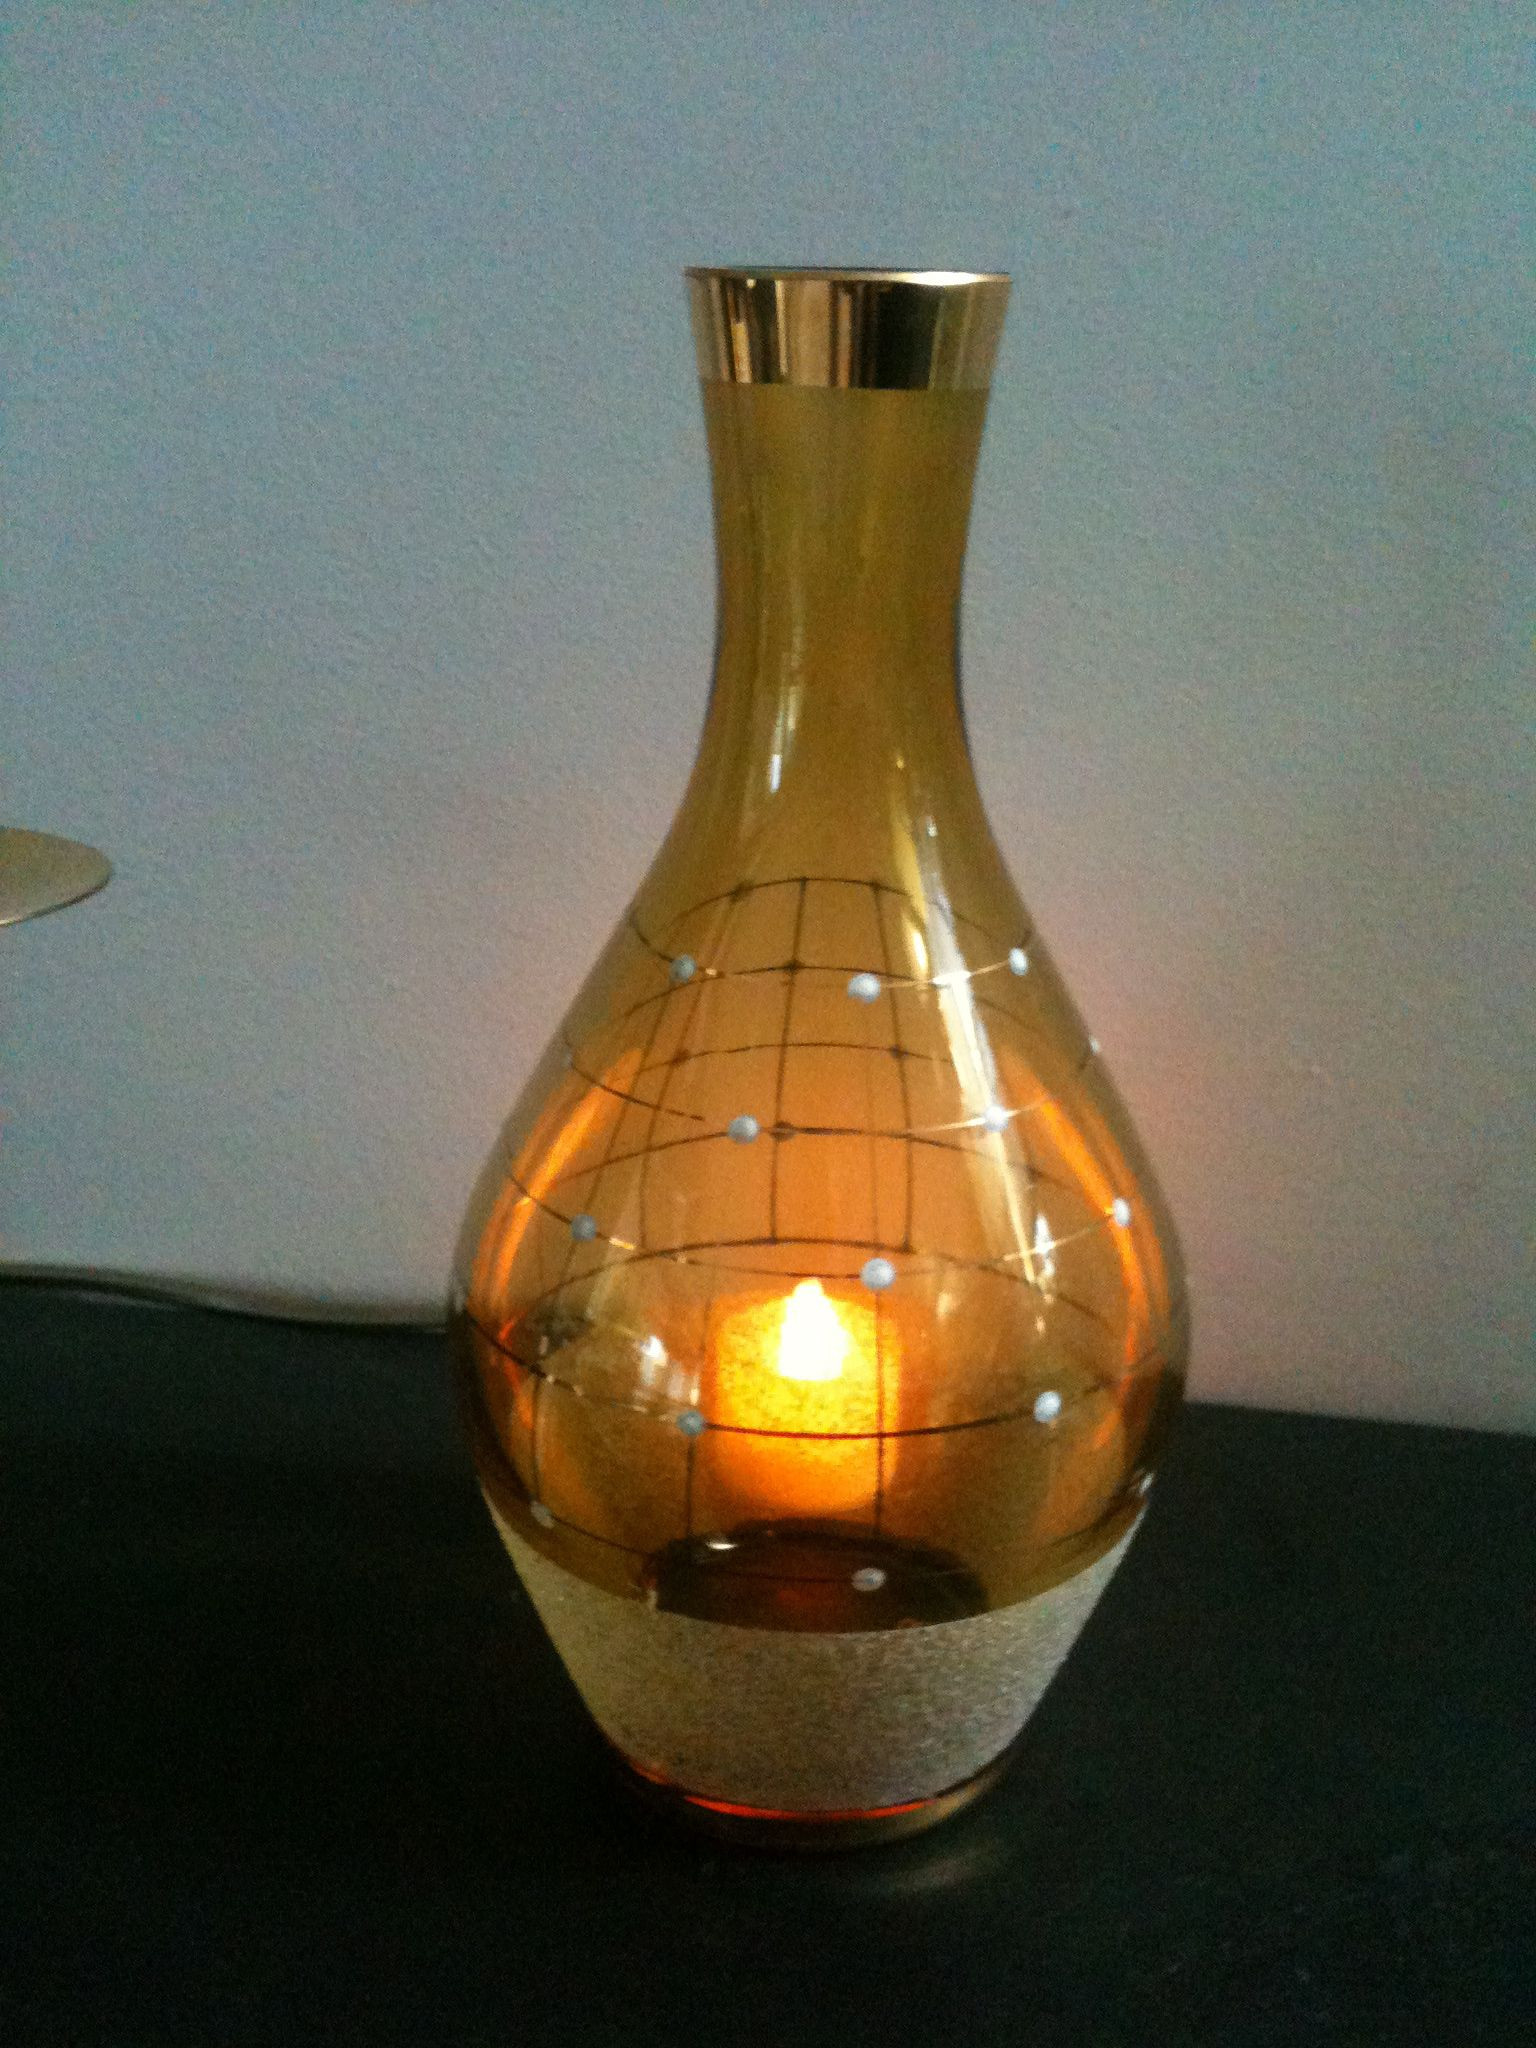 10 Lovely Amber Colored Glass Vases 2024 free download amber colored glass vases of an idea of what the tealights will look like behind amber coloured regarding an idea of what the tealights will look like behind amber coloured glass this is